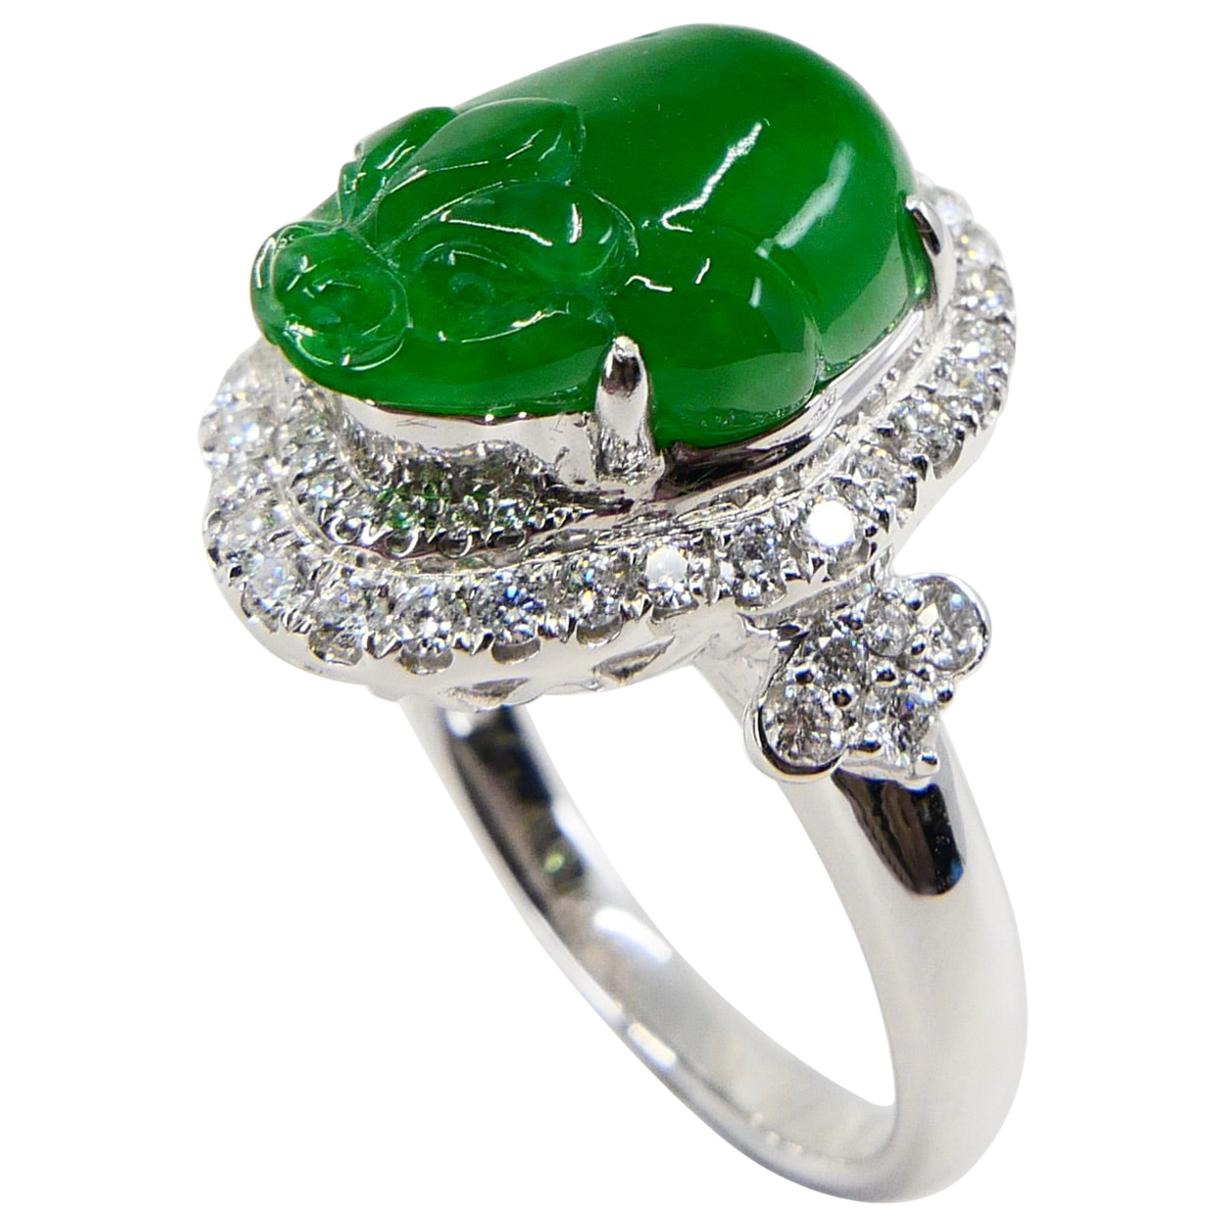 Certified Type A Jadeite Jade and Diamond Cocktail Ring, Best Imperial Green